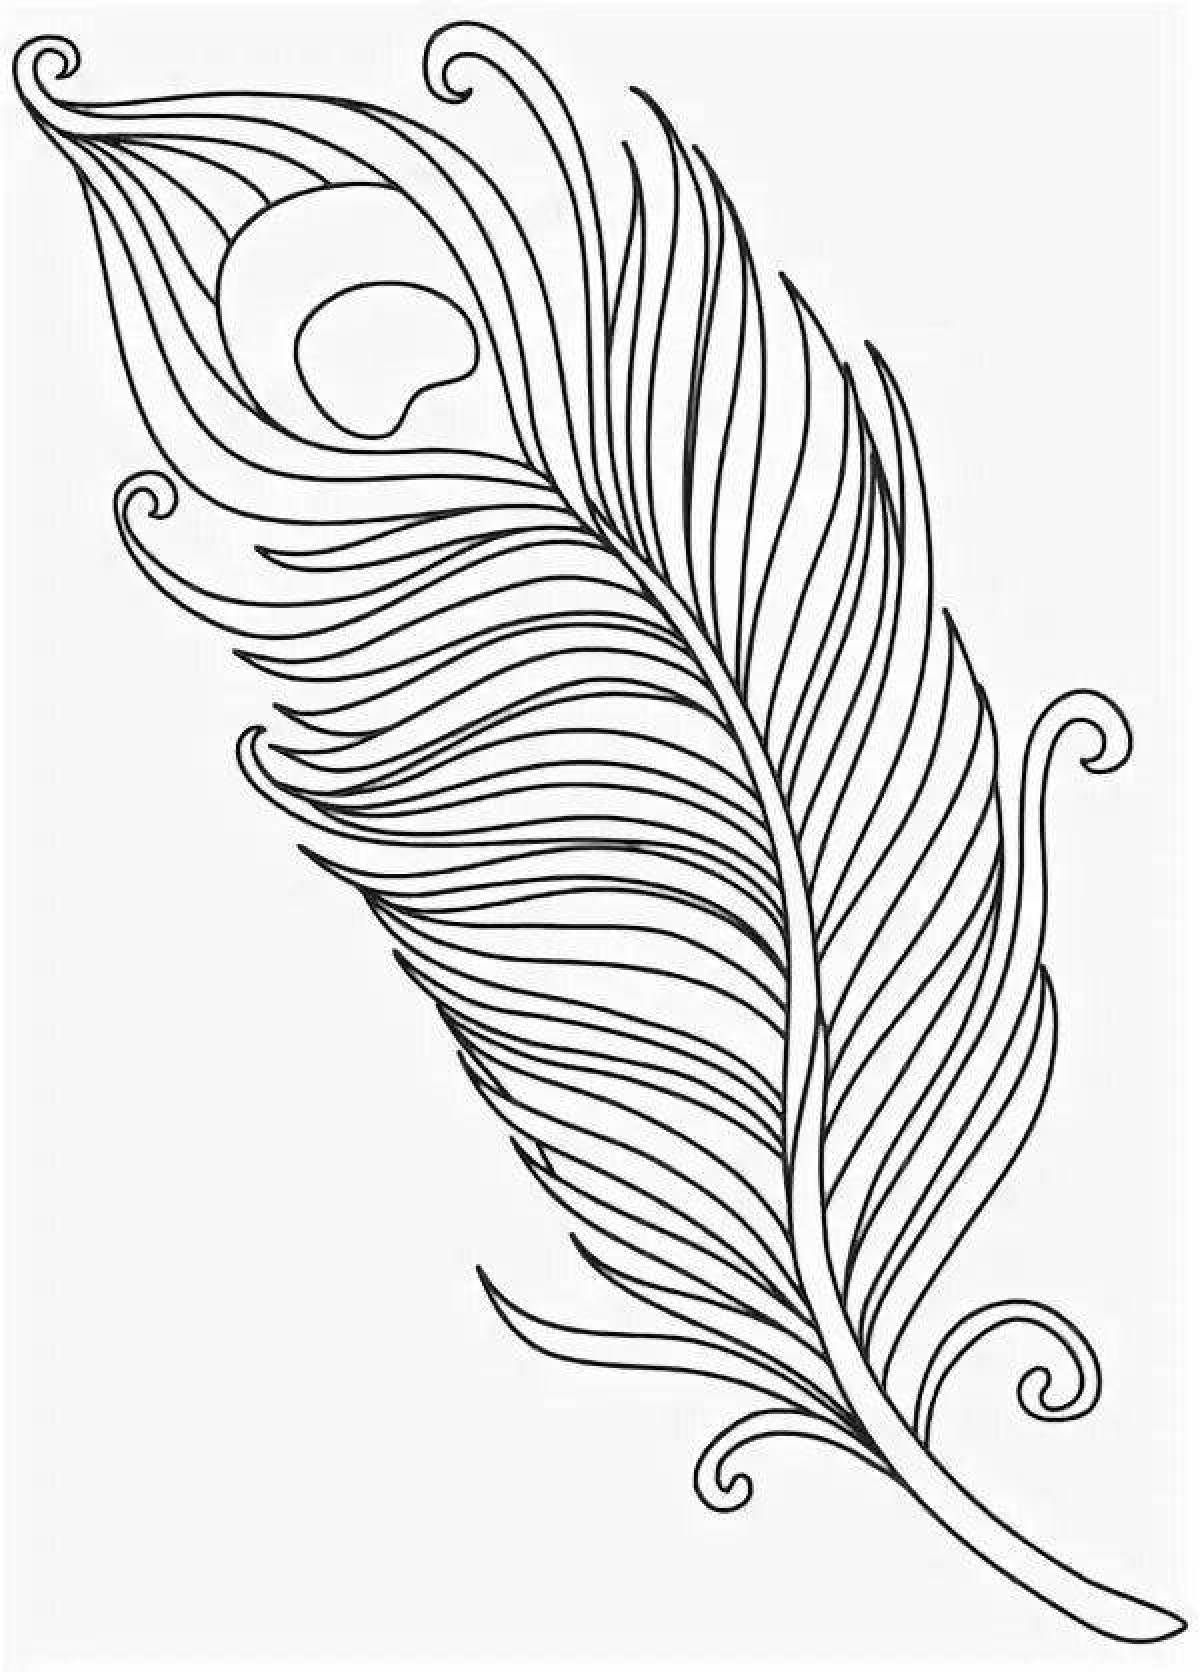 Colorful firebird feather coloring book